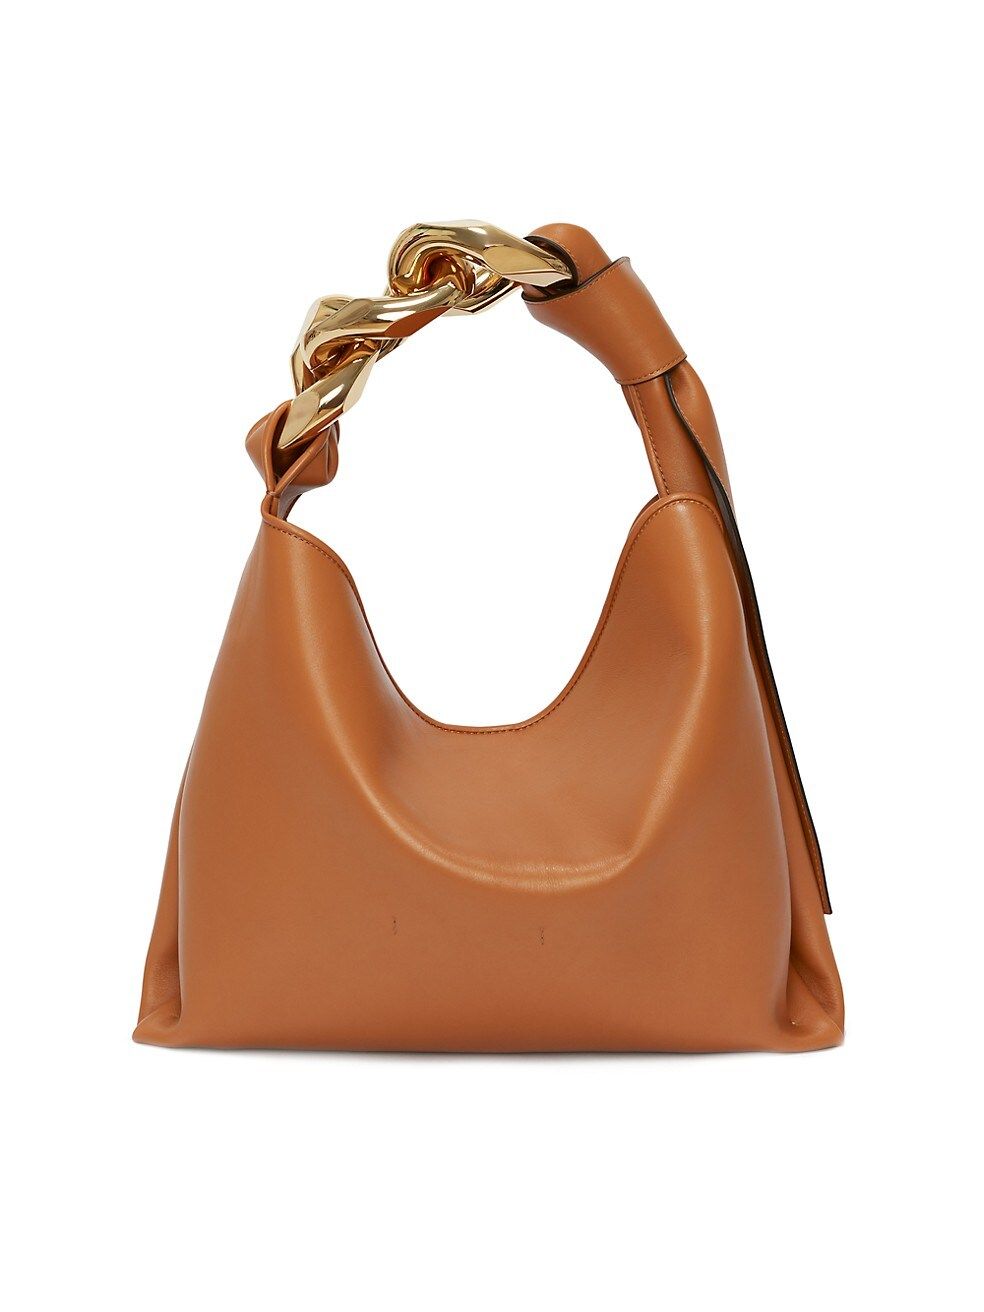 JW Anderson Small Chain Leather Hobo Bag | Saks Fifth Avenue